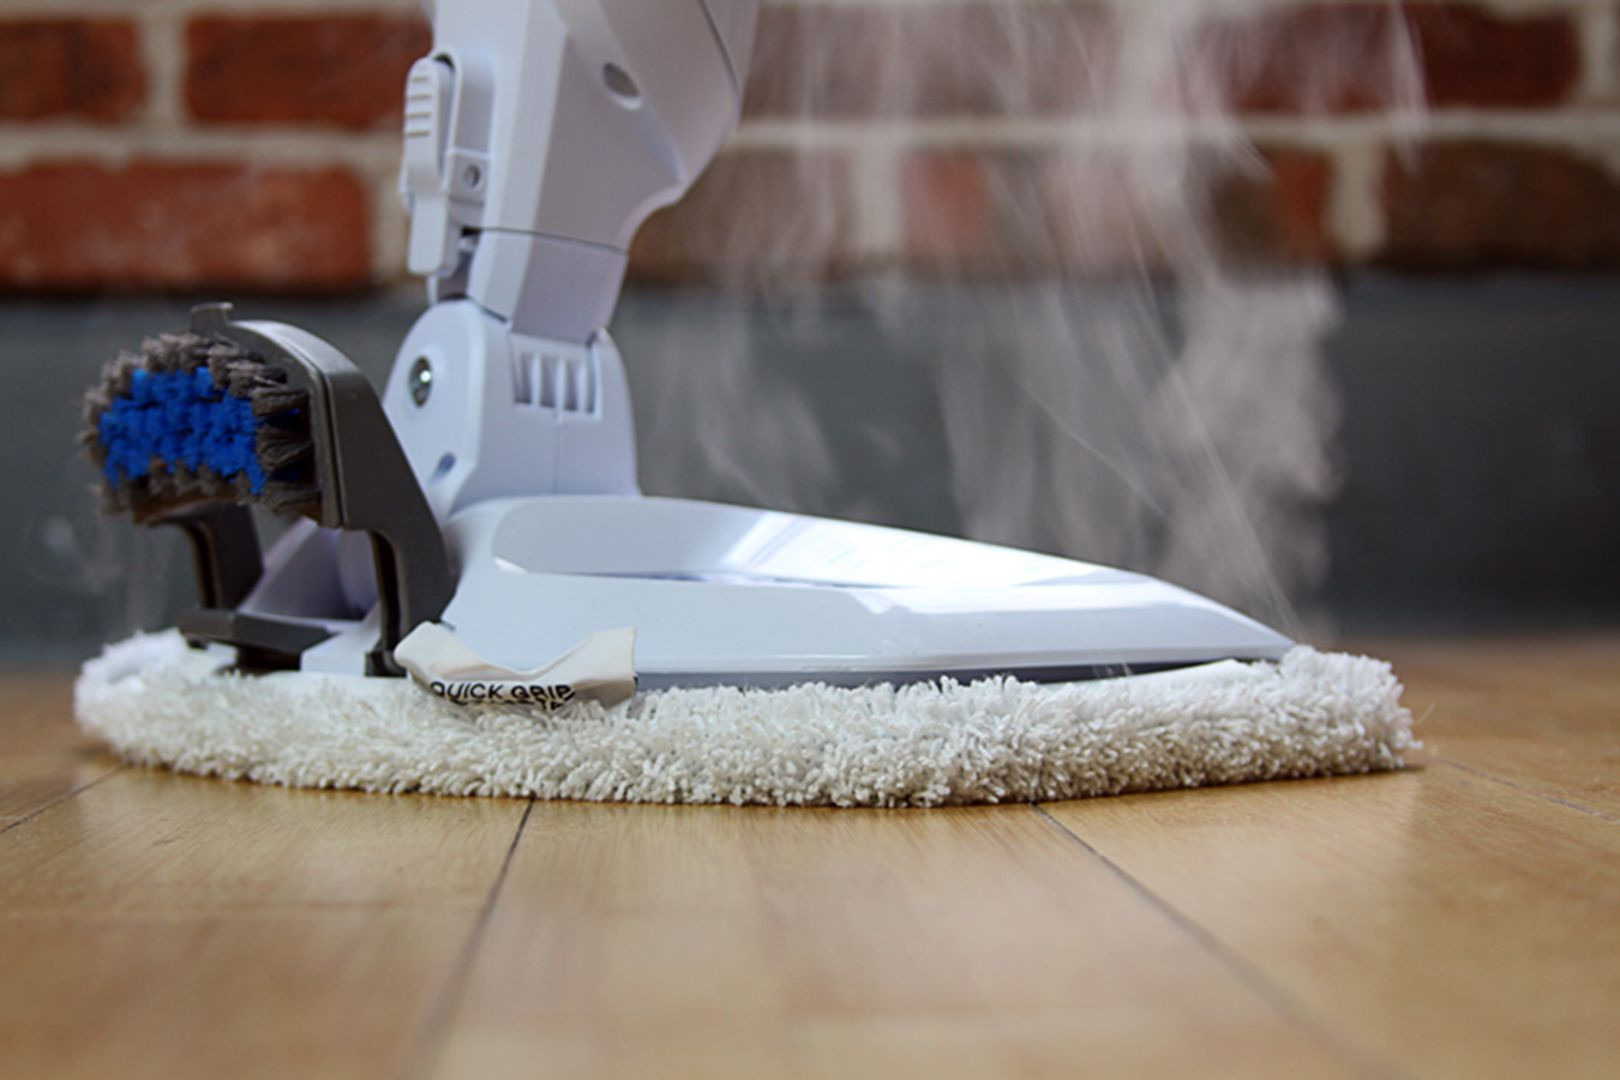 23 Fantastic Hardwood Floor Maintenance Cleaning 2023 free download hardwood floor maintenance cleaning of use a steam mop efficiently if you want clean floors with steam mop 33683344996 29f26c2761 o 58f116ab3df78cd3fc1c2c16